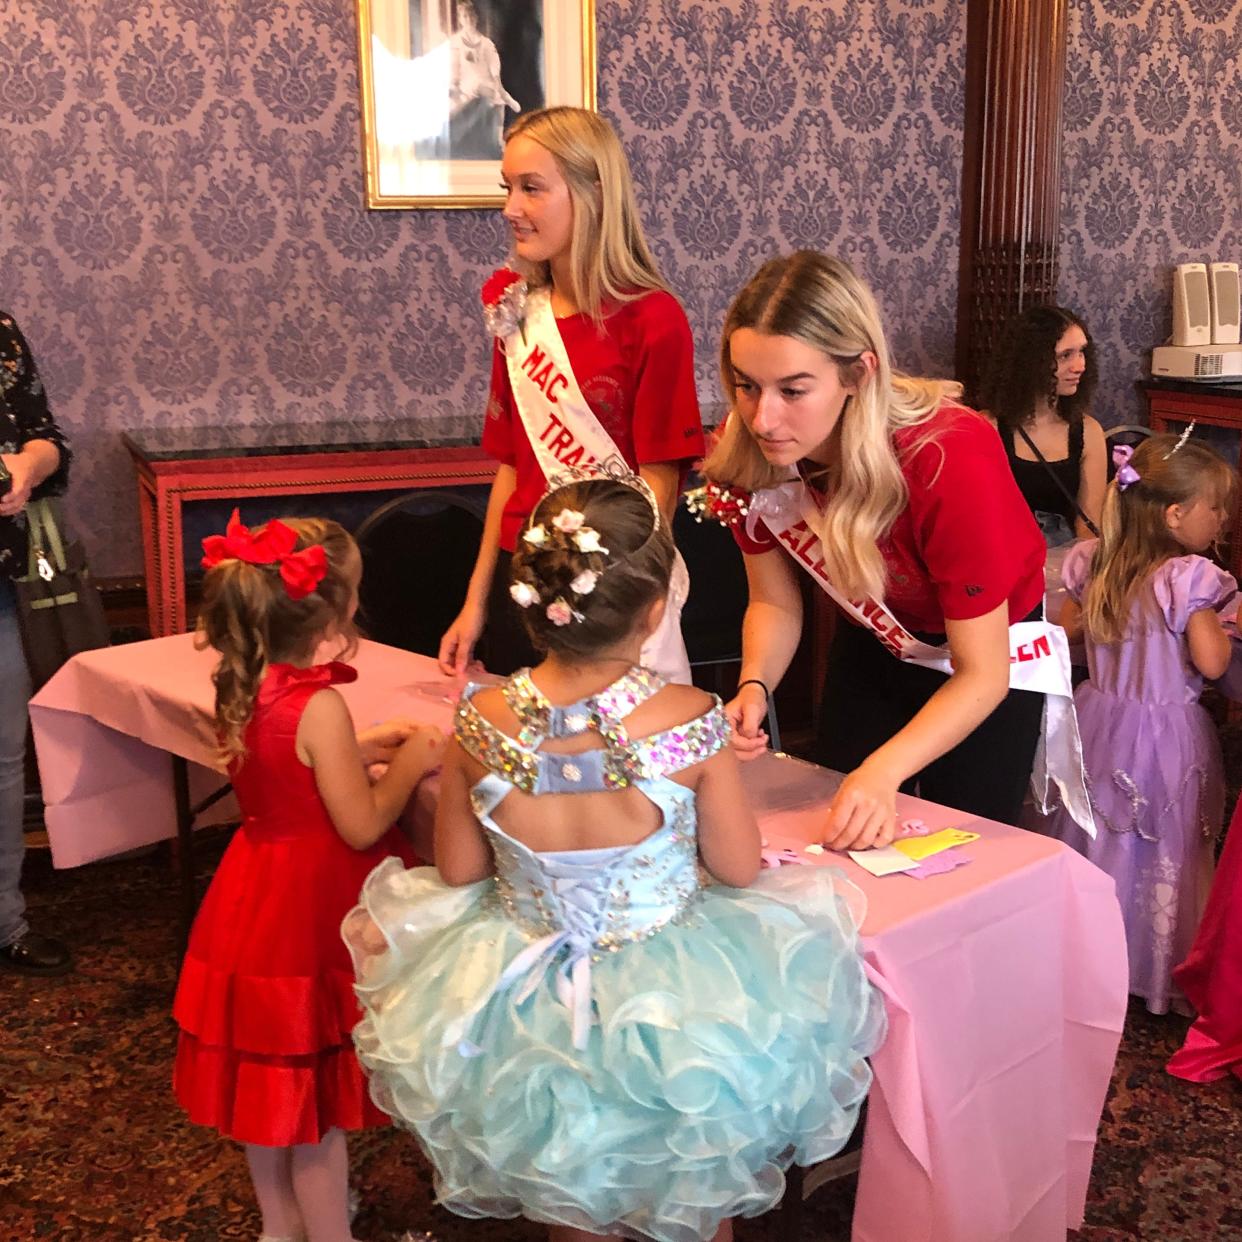 Kenna McElroy, left, and Olivia Bertolini, right, who are participating in the 2022 Carnation Festival Queen Pageant on July 30, 2022, helped little girls make crowns at "A Royal Afternoon at The Castle" Sunday, June 24, 2022, at Glamorgan Castle in Alliance.